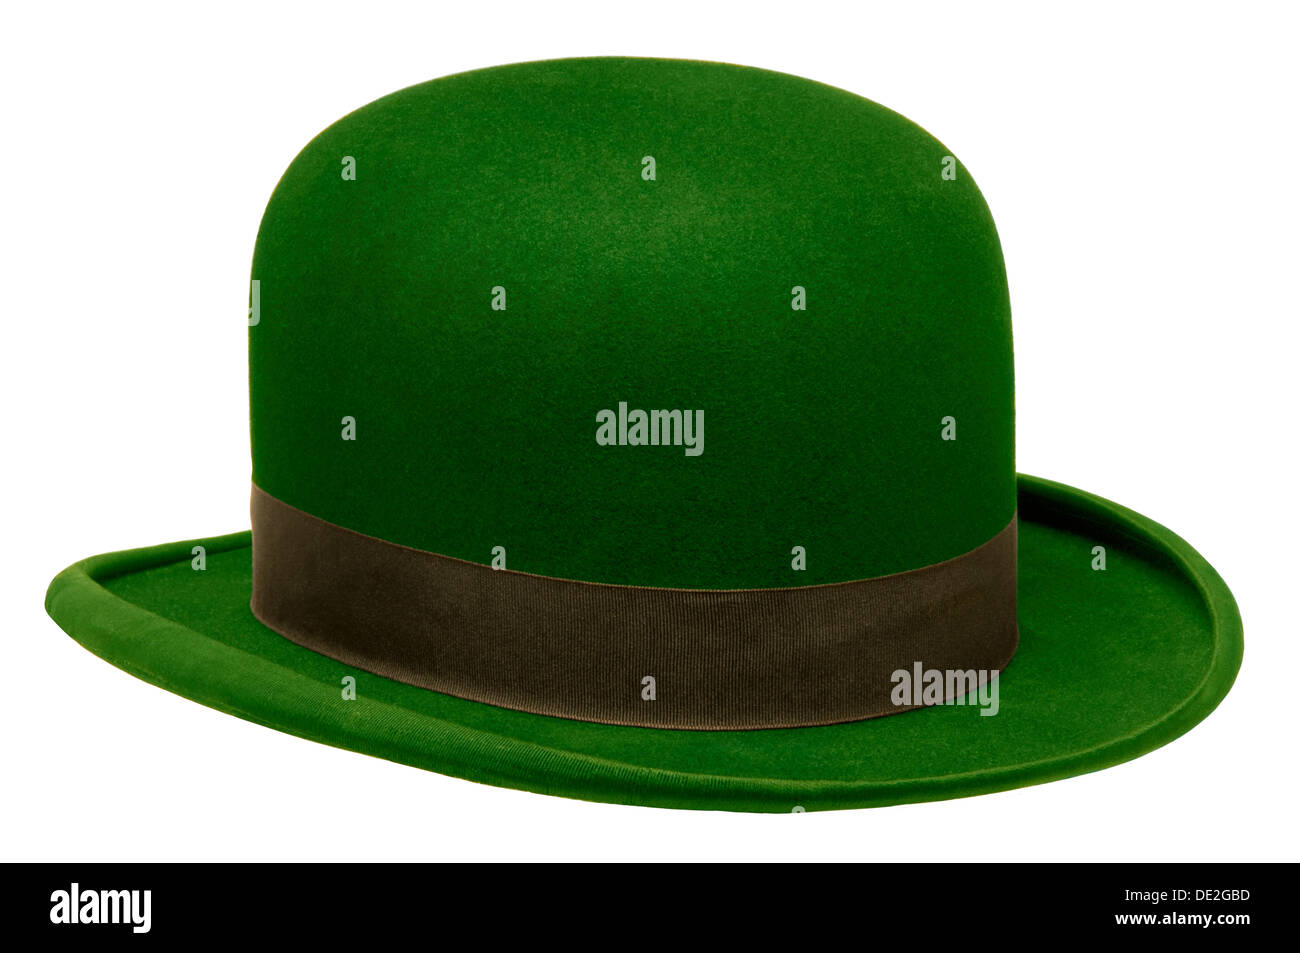 Green bowler or derby hat isolated against white background Stock Photo